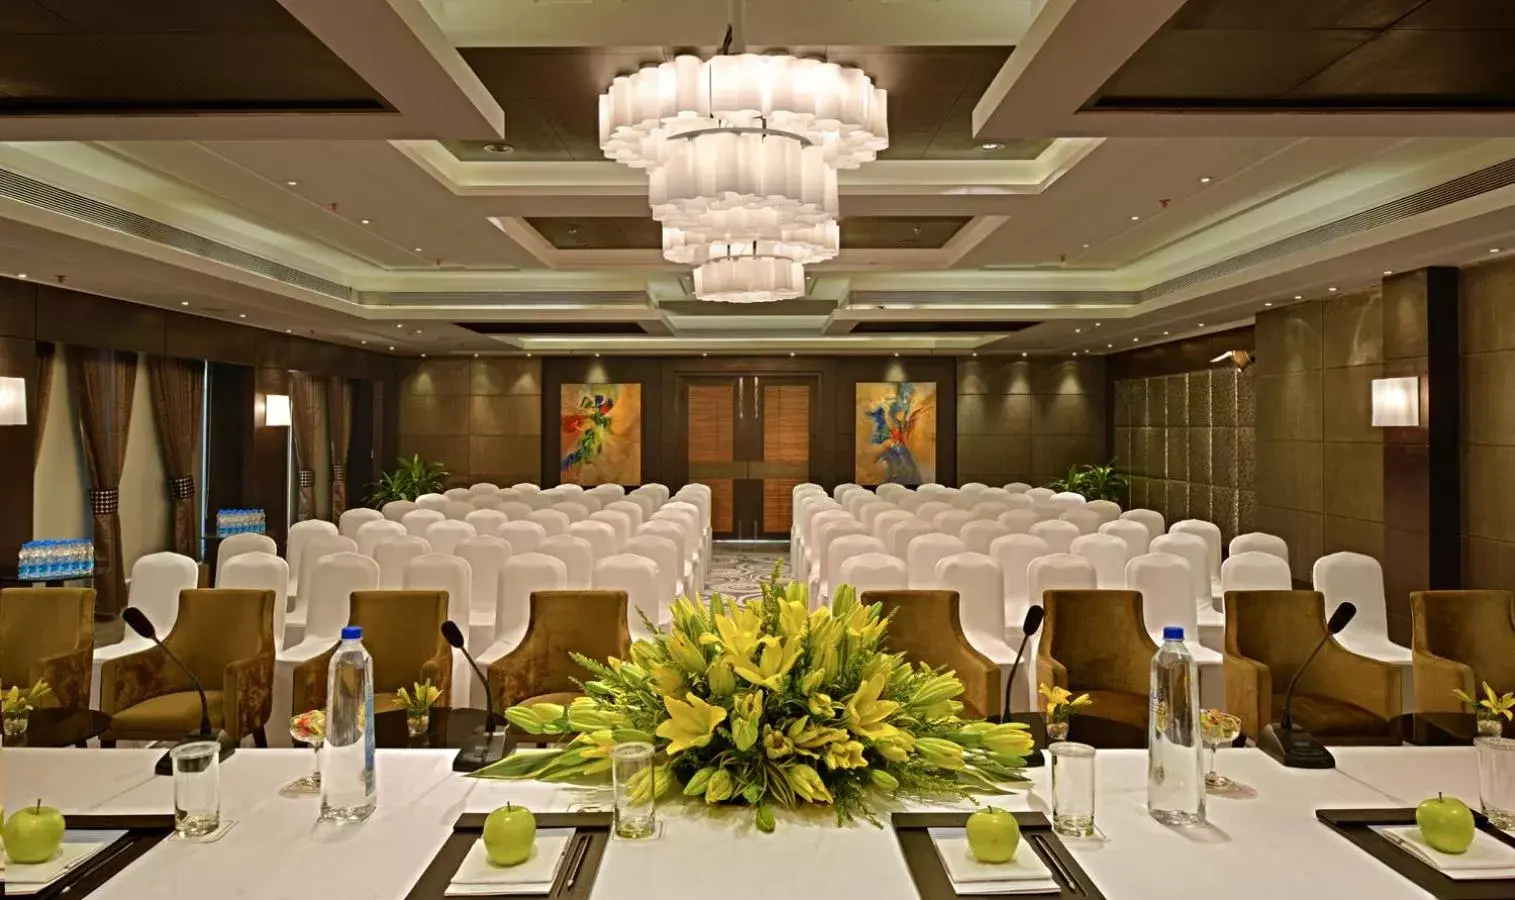 Banquet/Function facilities, Banquet Facilities in Fortune District Centre, Ghaziabad - Member ITC's Hotel Group